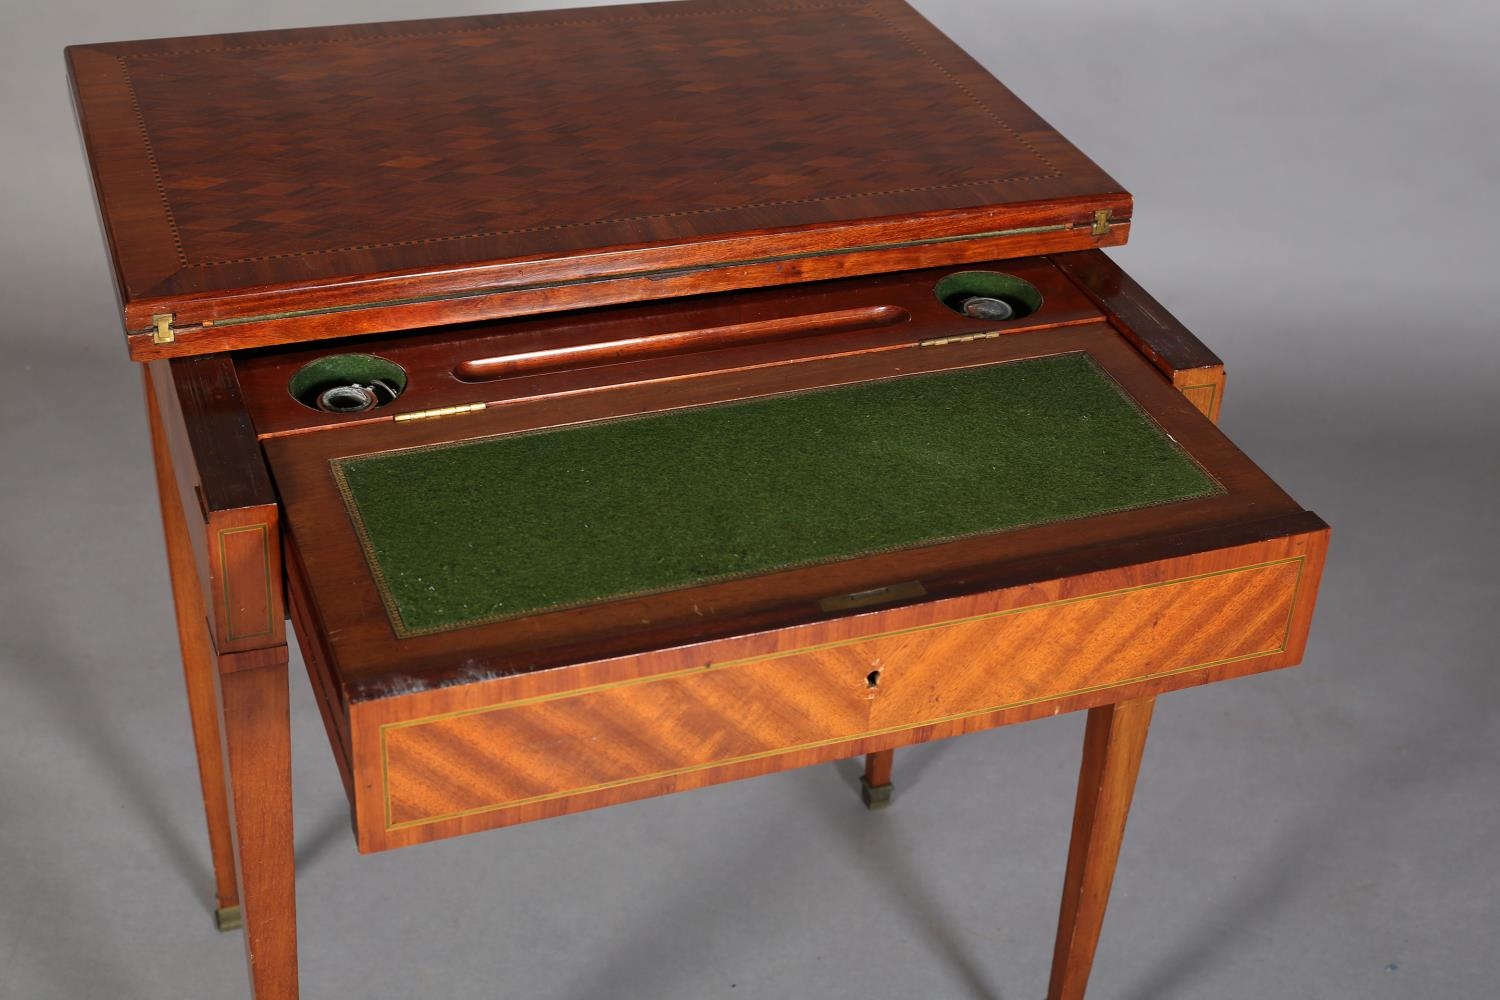 AN EARLY 20TH CENTURY MAHOGANY AND SATIN WALNUT PARQUETRY CARD, WRITING AND DRESSING TABLE inlaid - Image 10 of 10